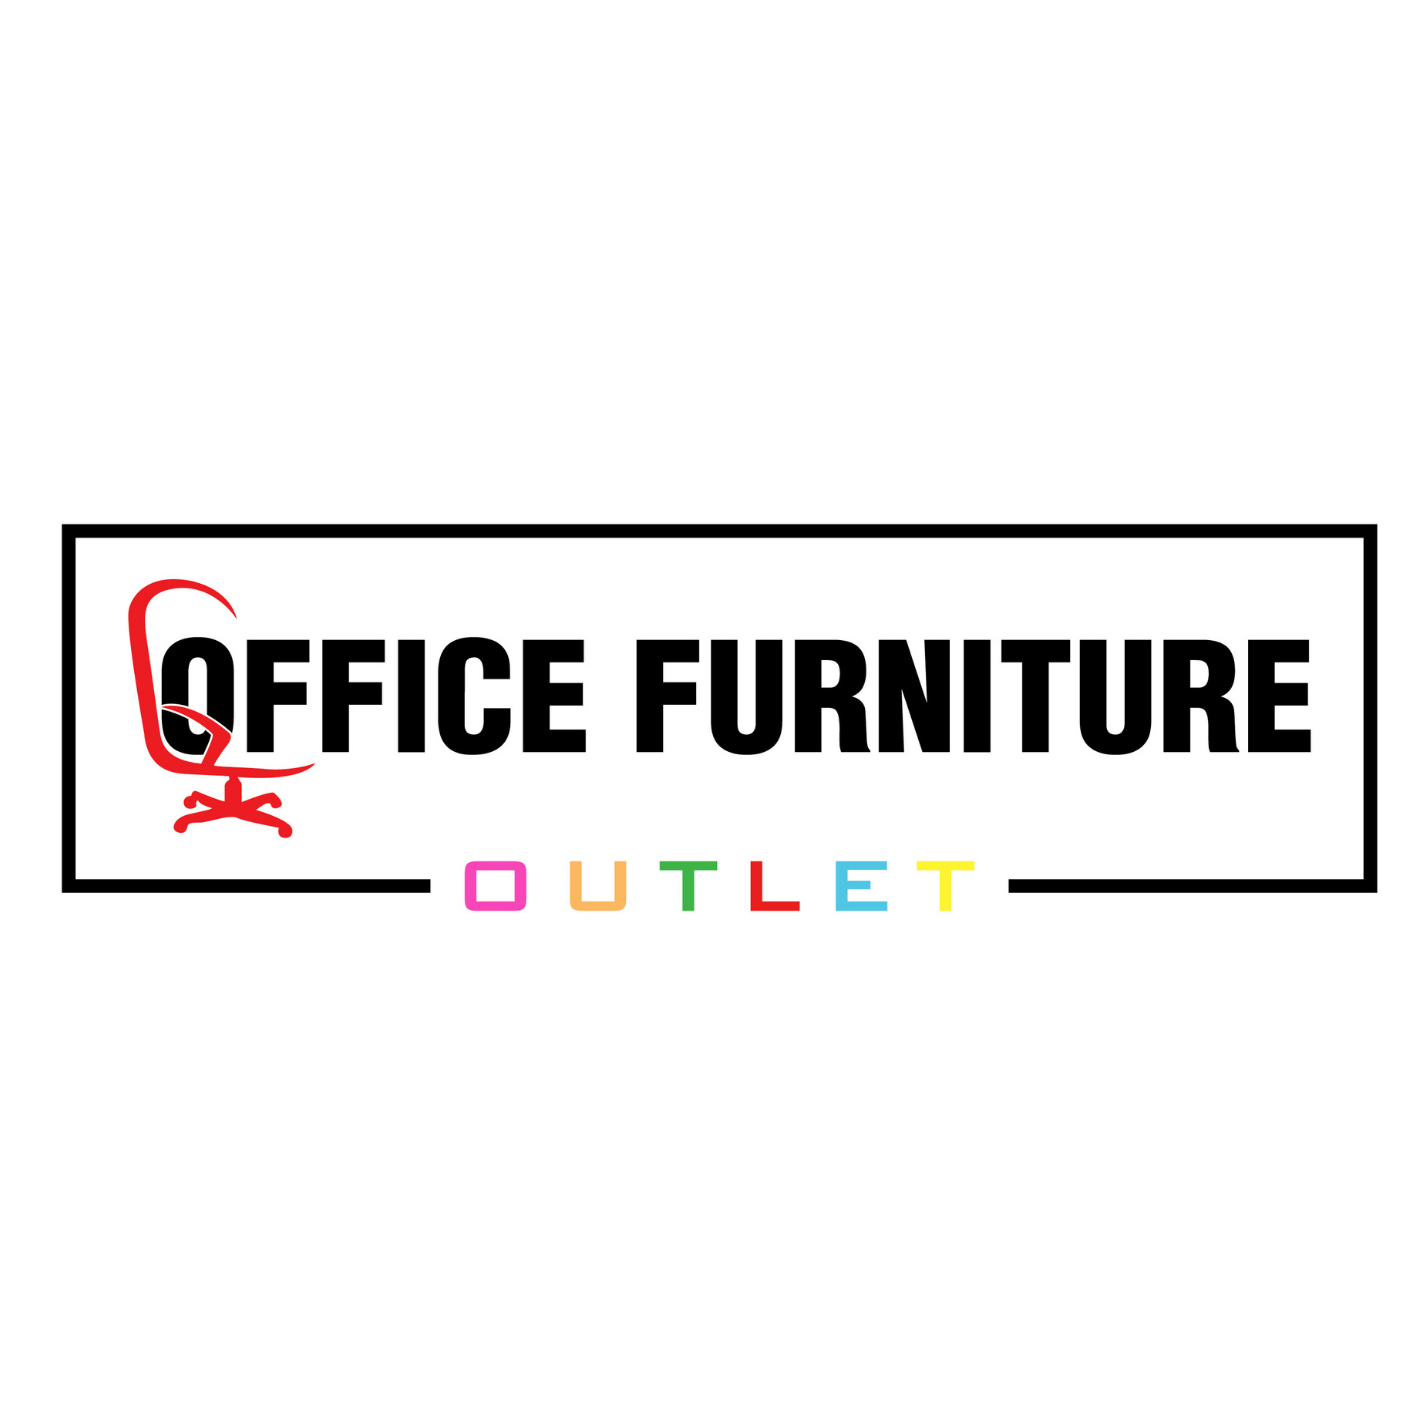 furnitrue for offices